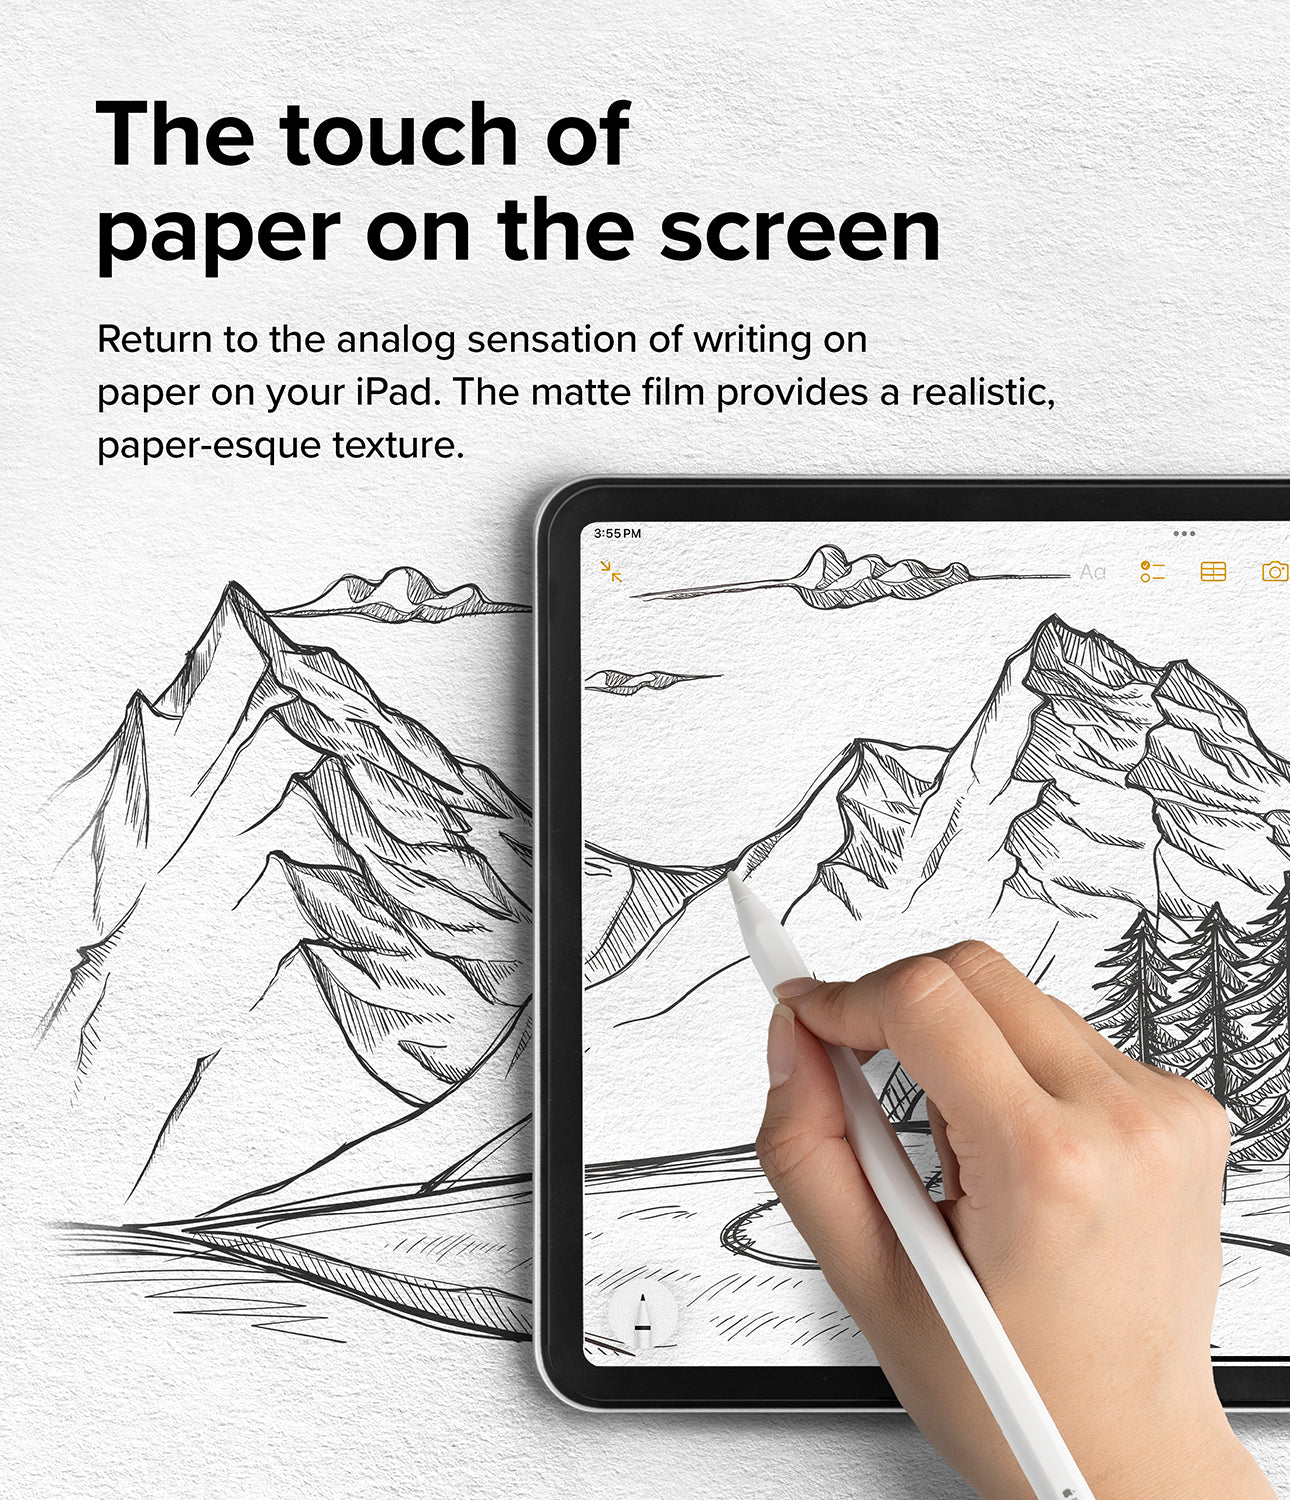 iPad Air 11" (M2) Screen Protector | Paper Touch Film - Hard - The touch of paper on the screen. Return to the analog sensation of writing on paper on your iPad. The matte film provides a realistic, paper-esque texture.